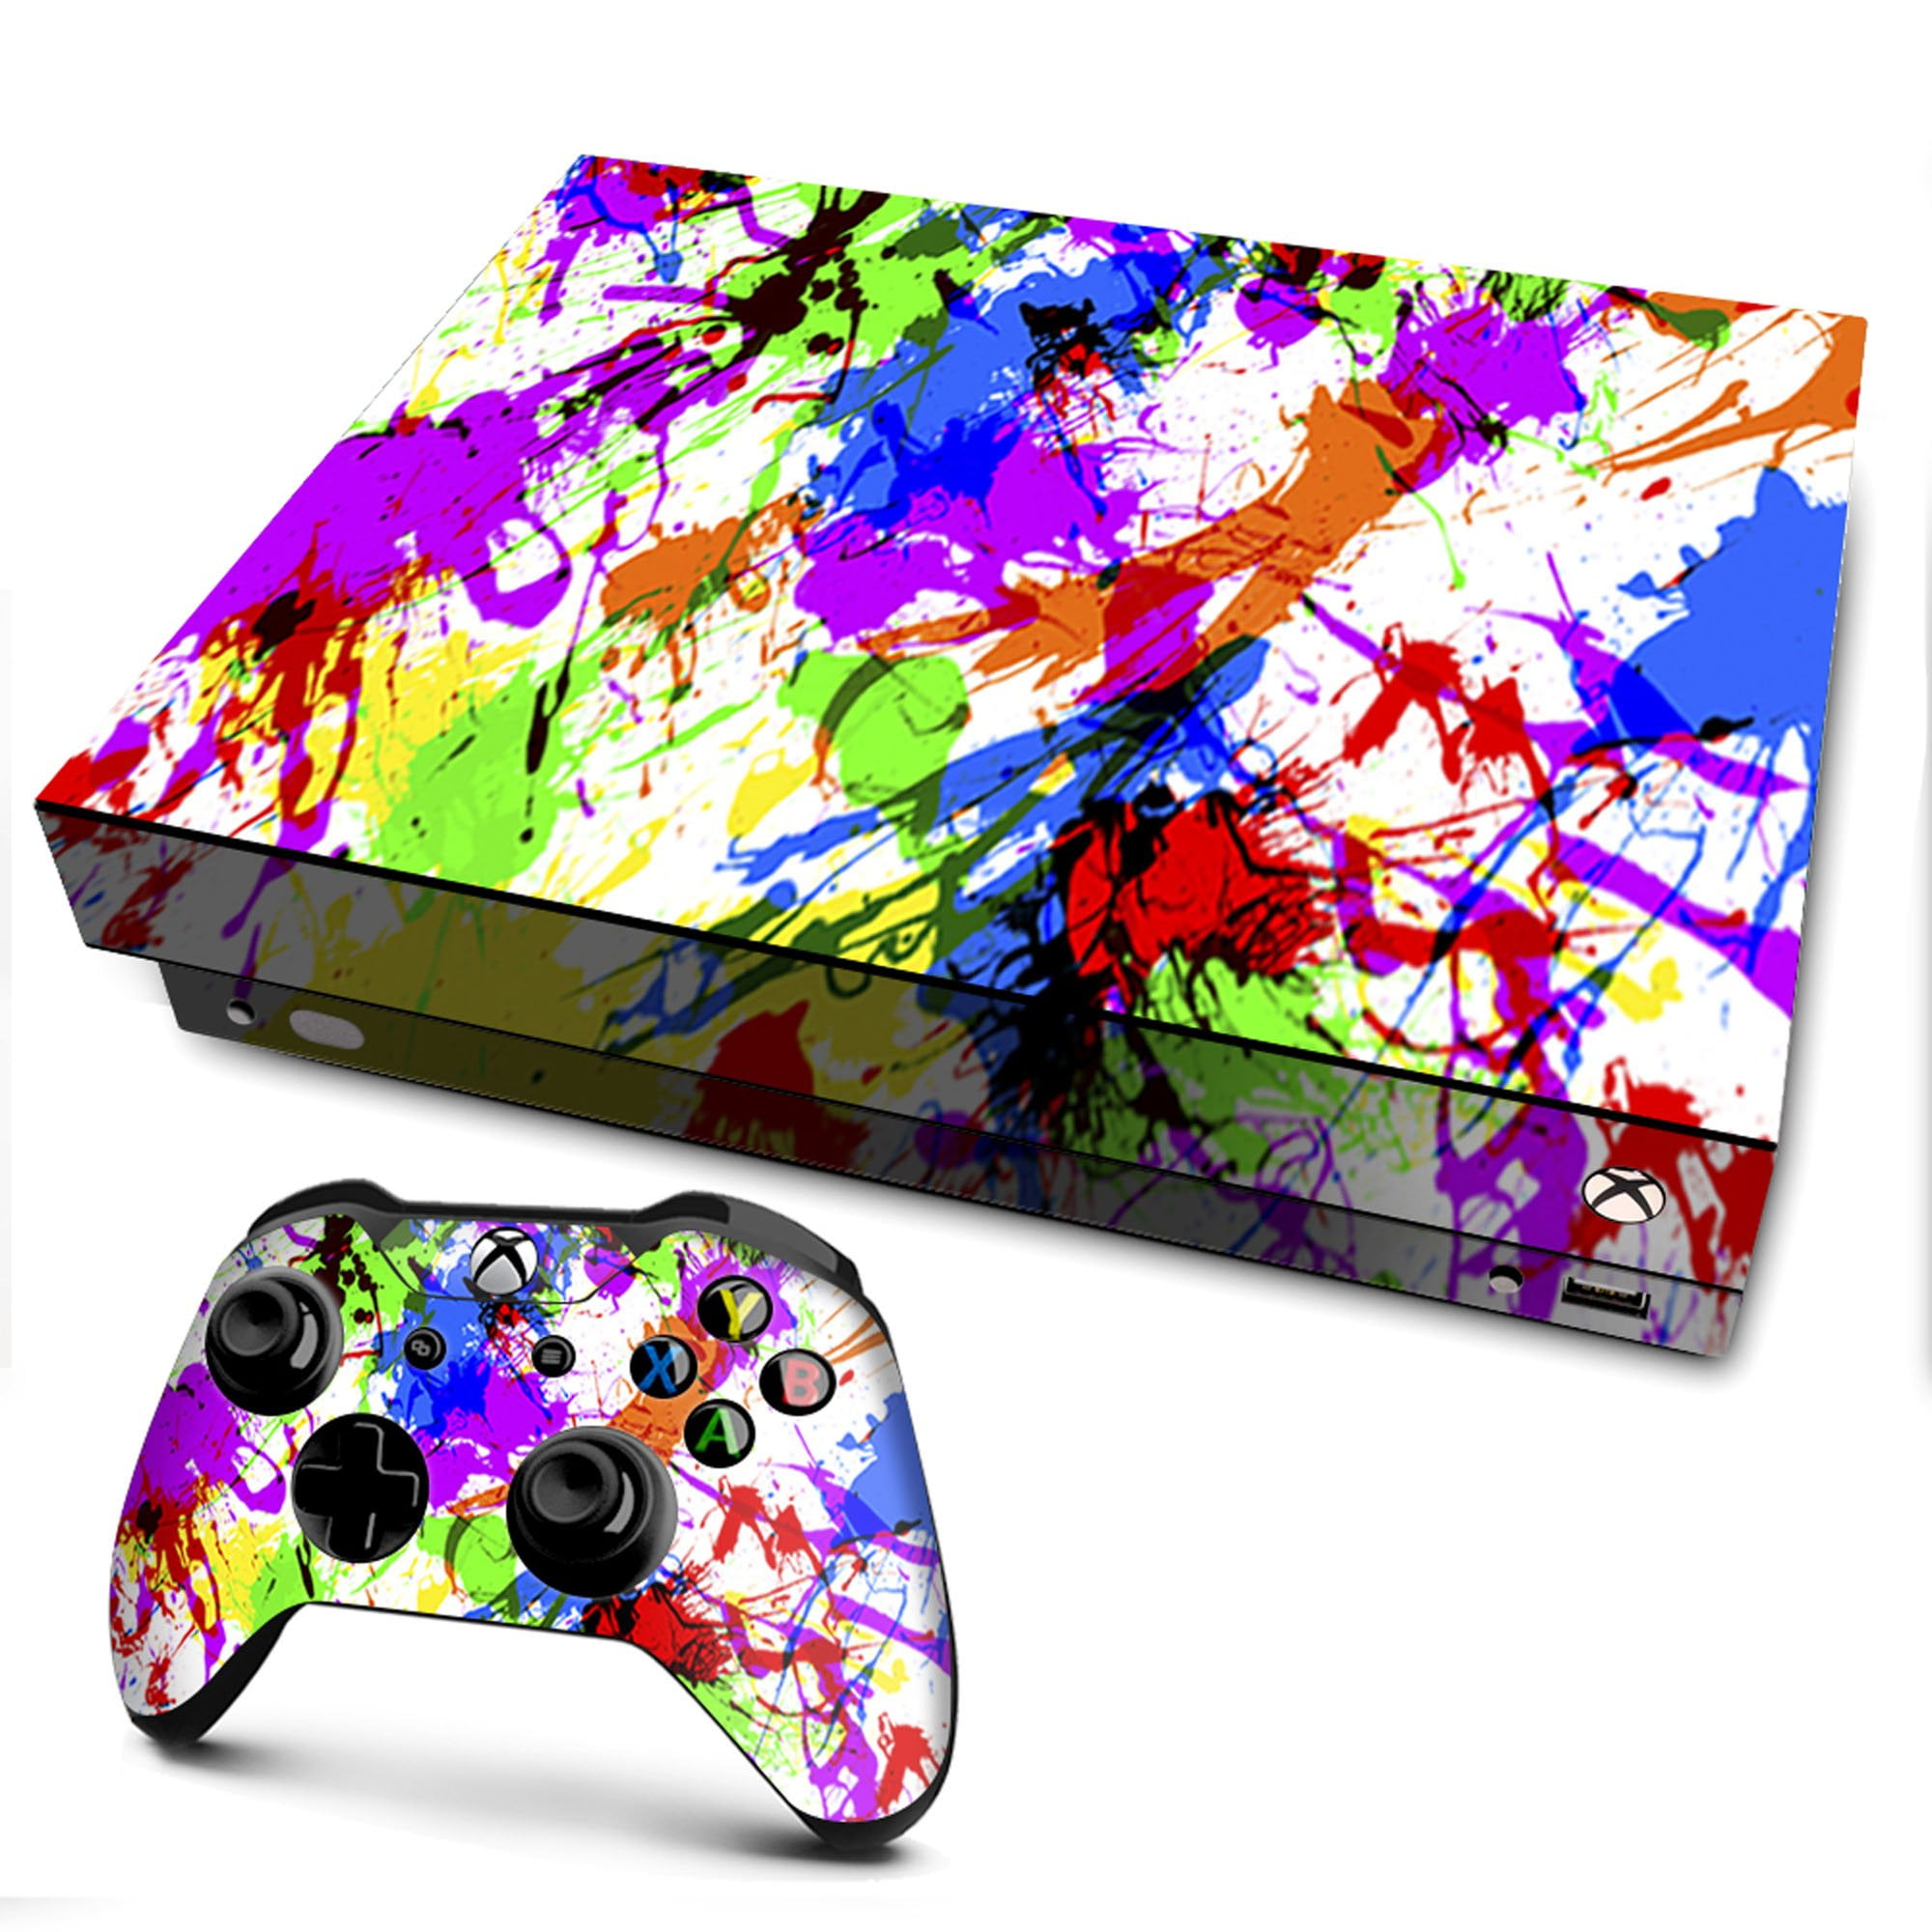 Skins Decal Vinyl Wrap for Xbox One X Console - decal stickers